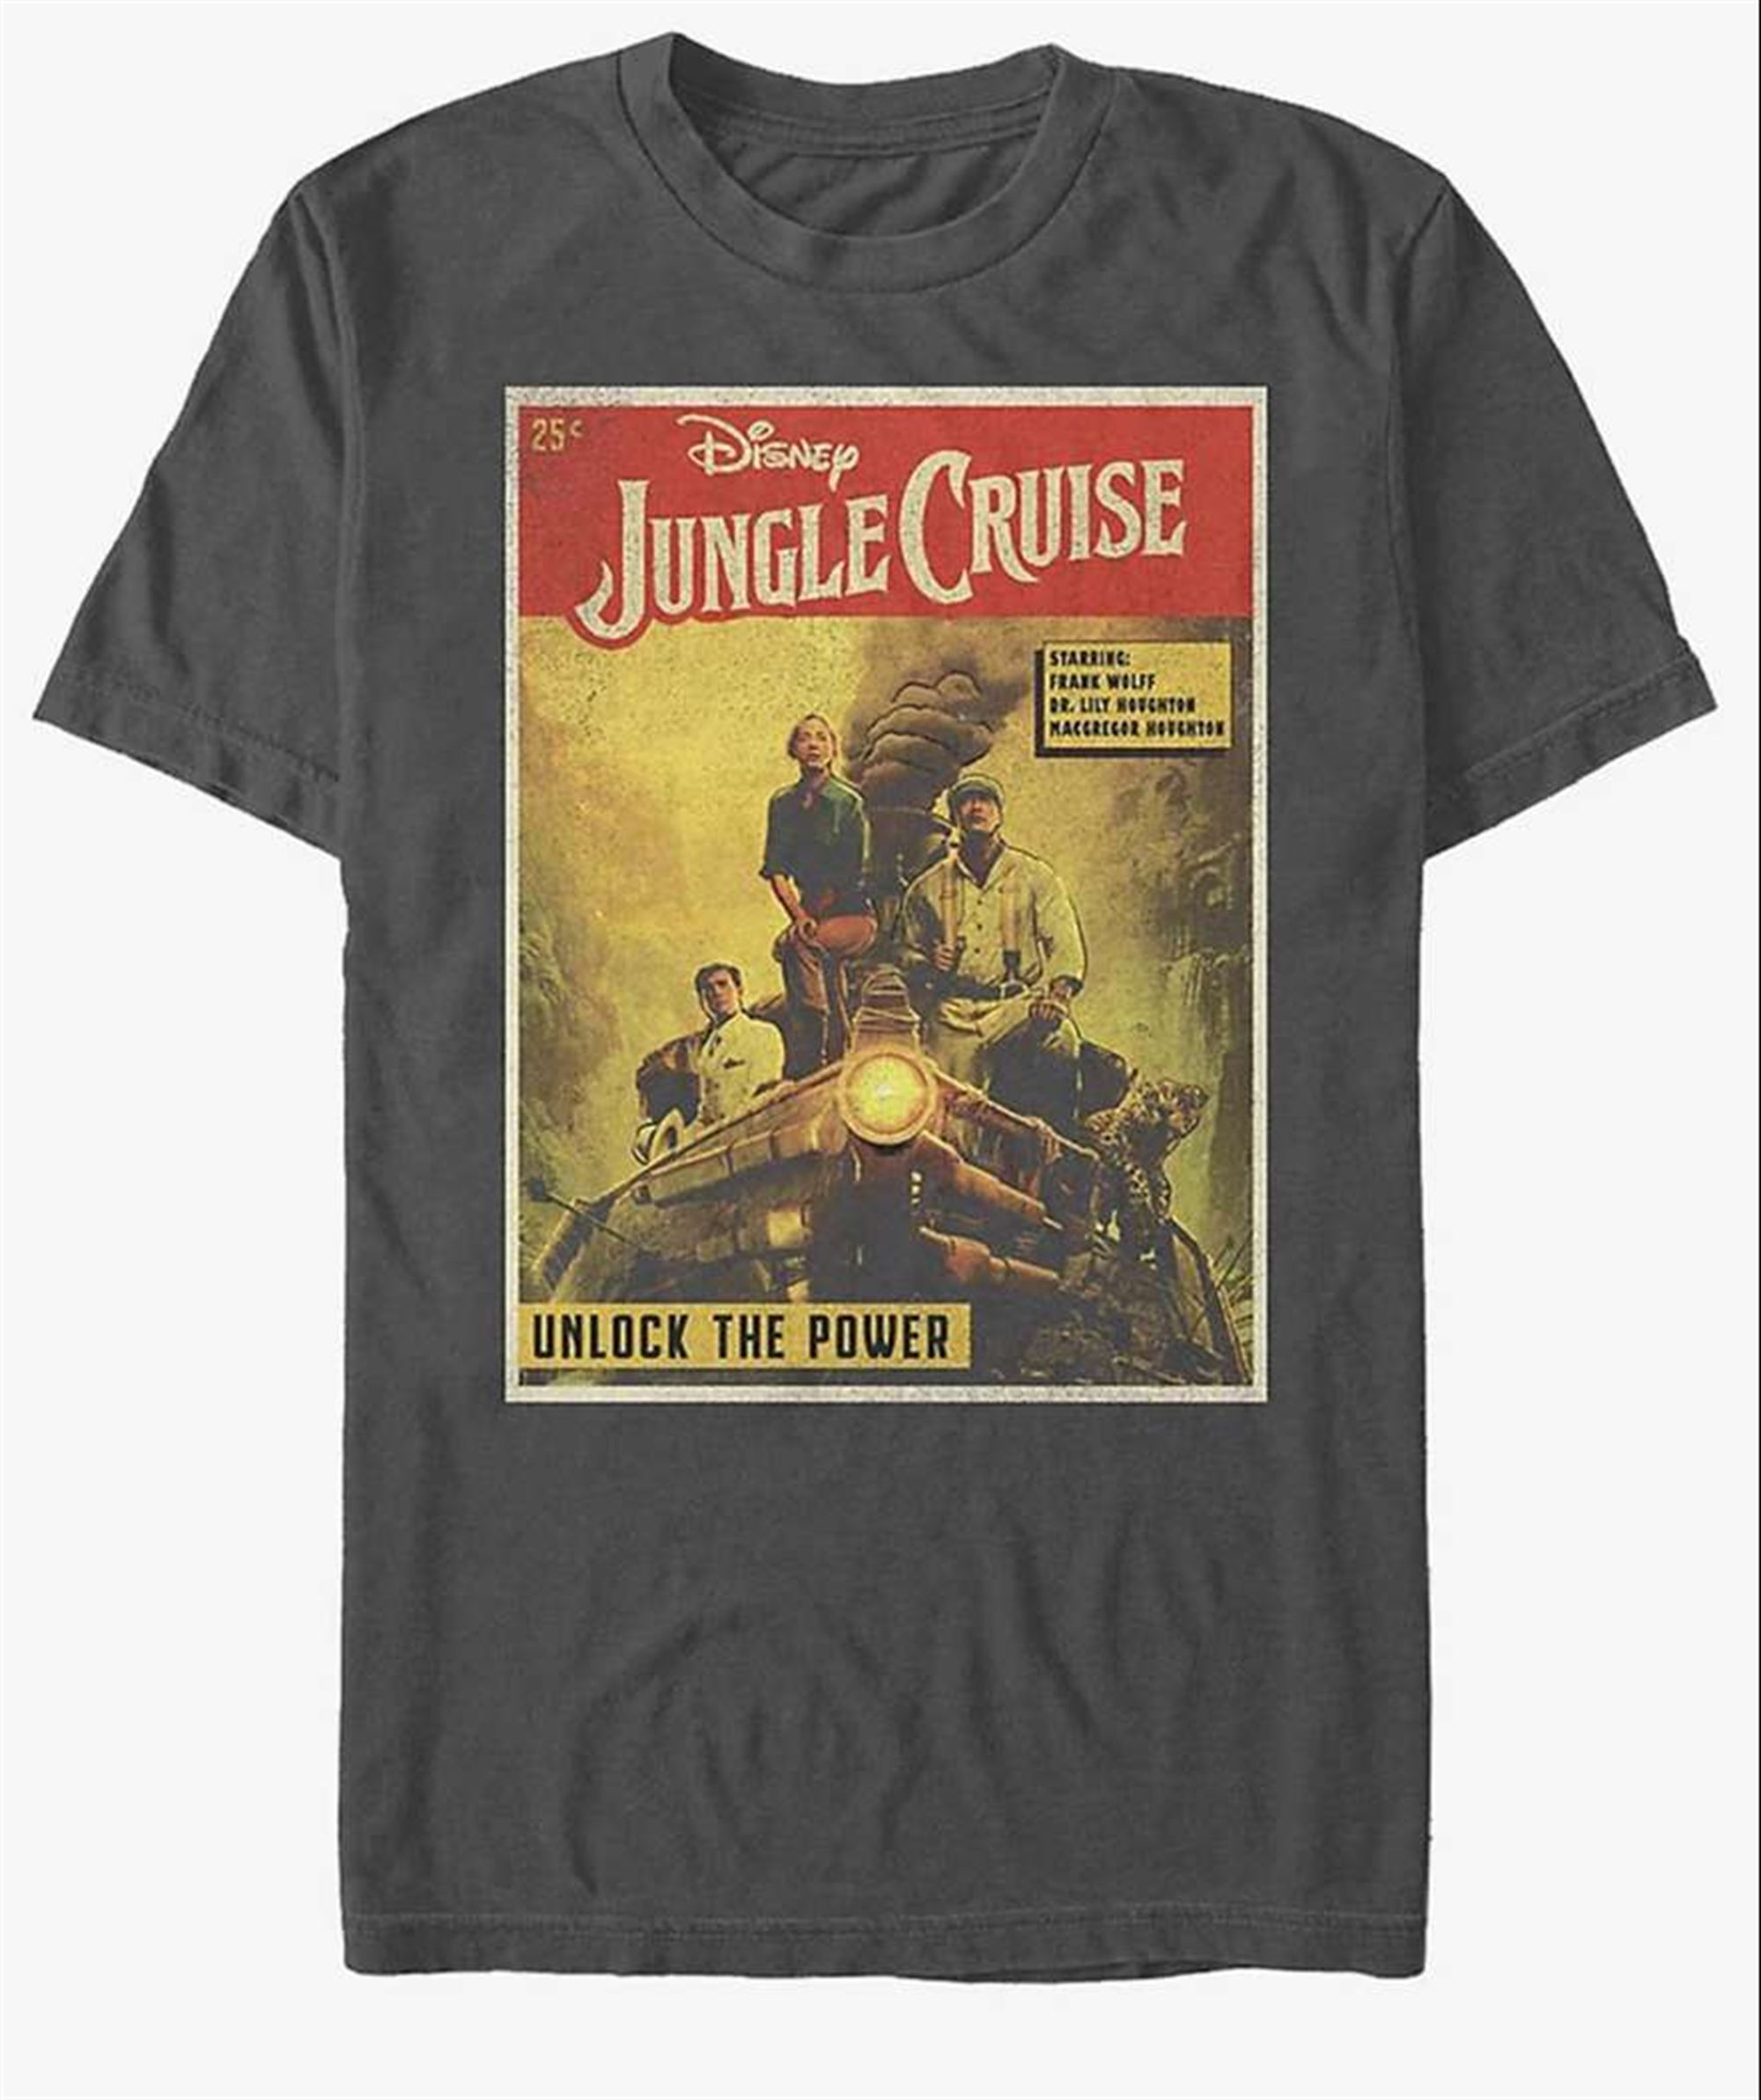 Jungle Cruise Comic Cover Disney T Shirt Size Up To 5xl